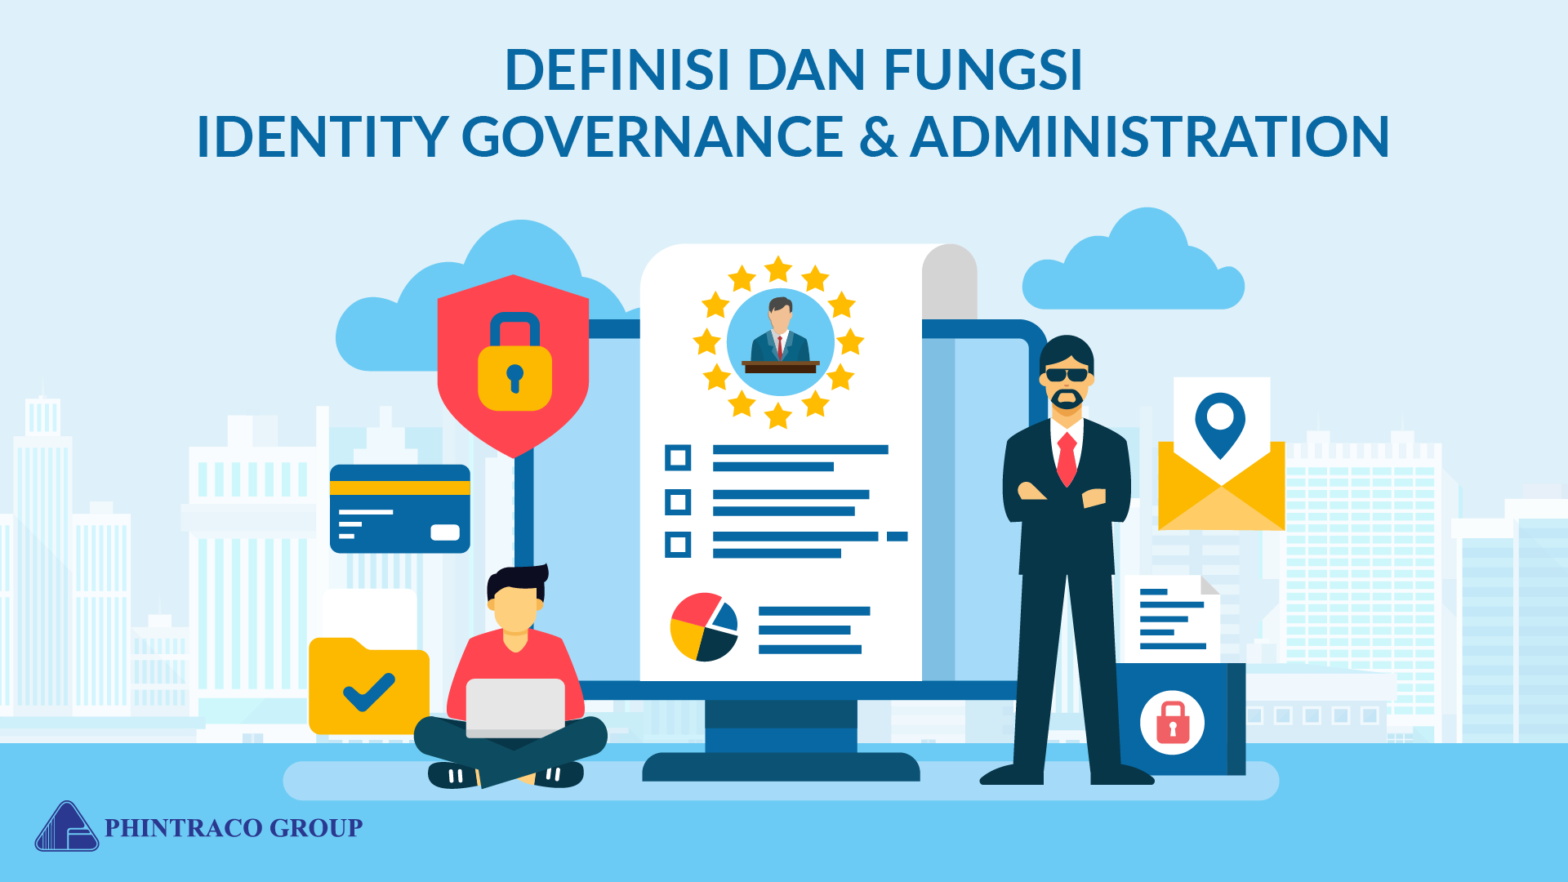 Identity Governance and Administration Market